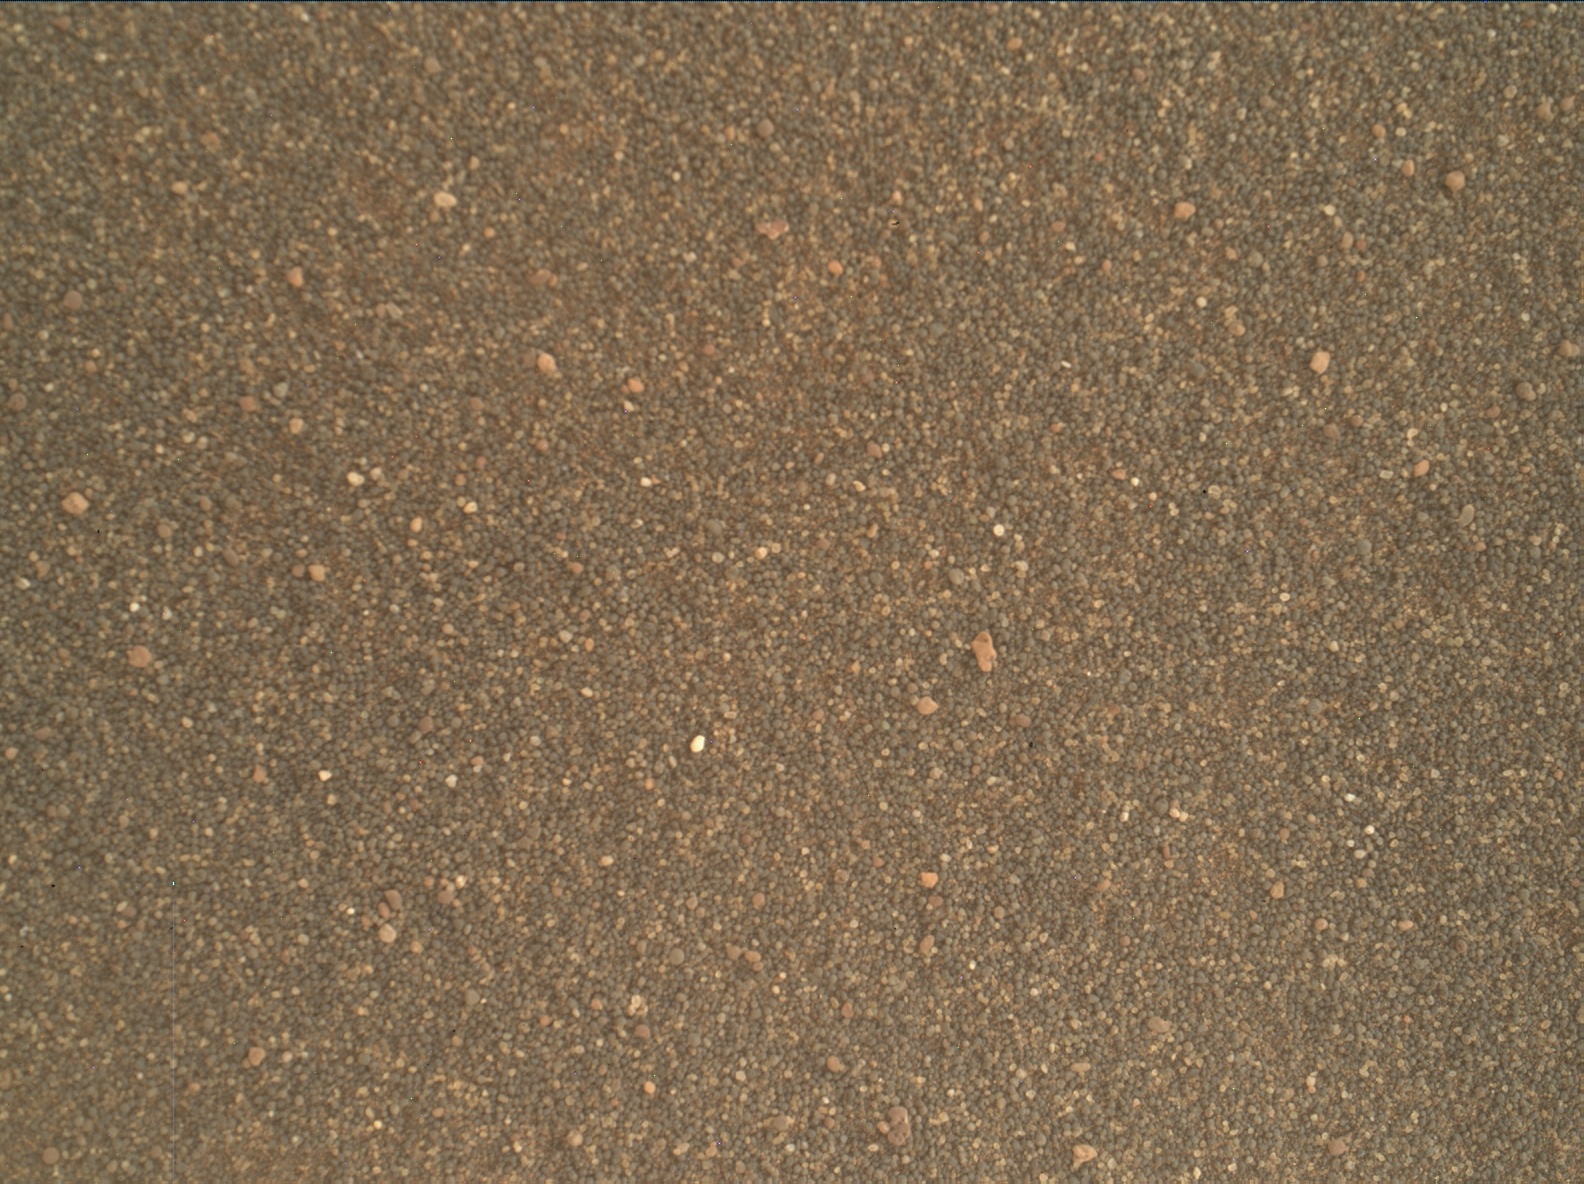 Nasa's Mars rover Curiosity acquired this image using its Mars Hand Lens Imager (MAHLI) on Sol 3285